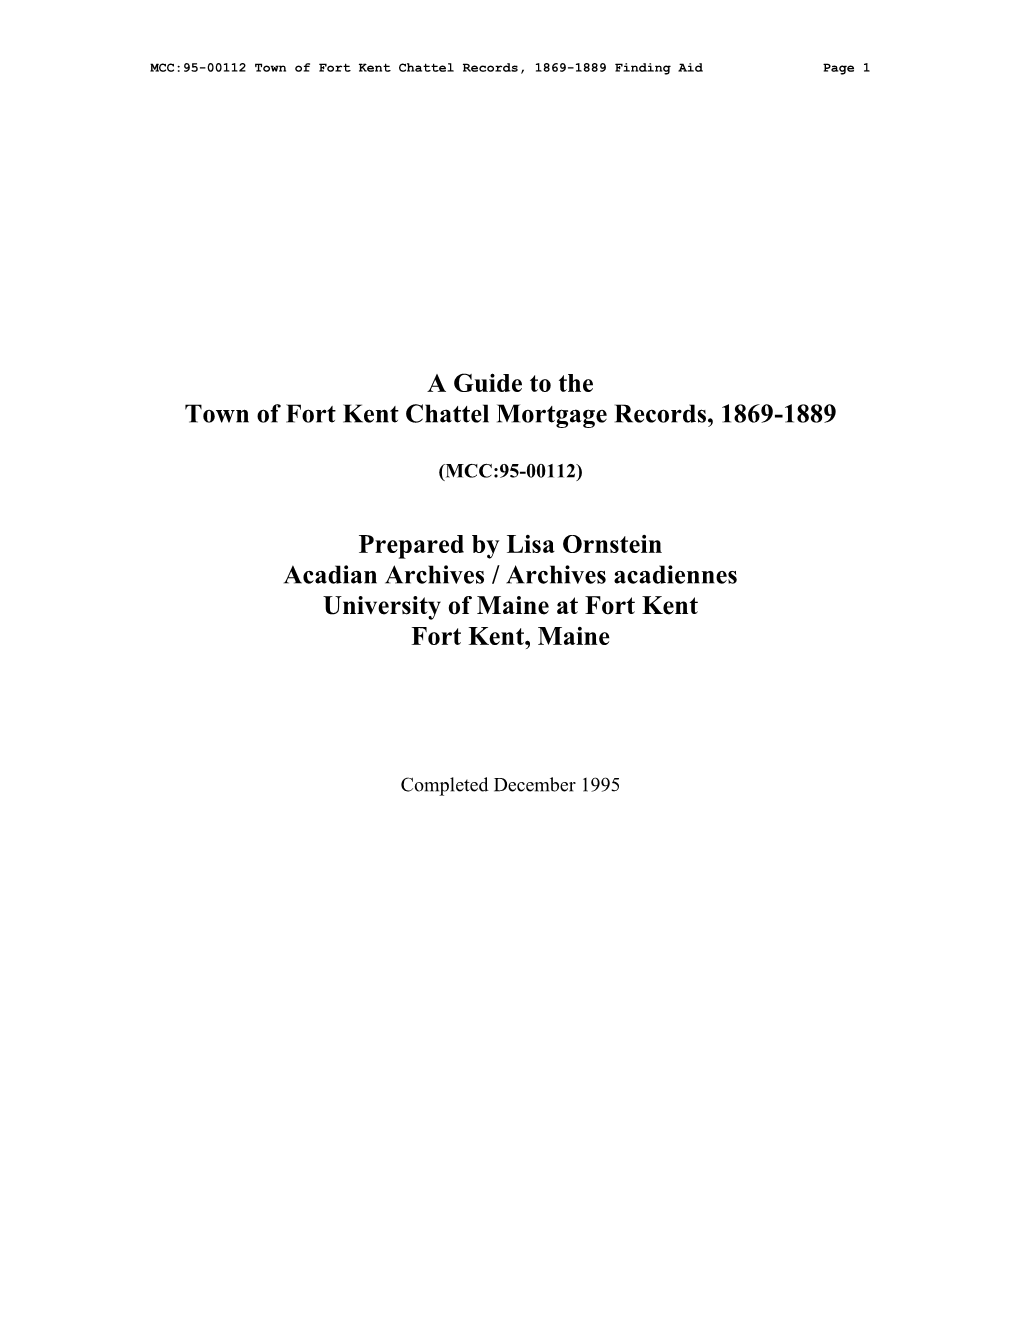 A Guide to the Town of Fort Kent Chattel Mortgage Records, 1869-1889